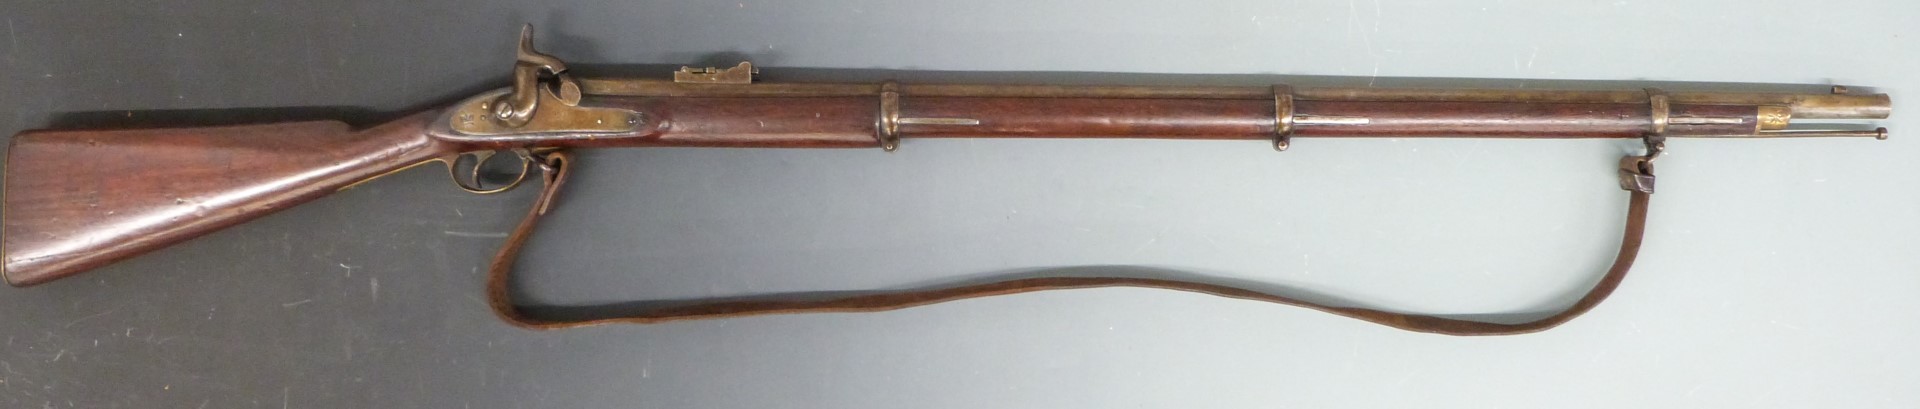 Enfield pattern three band percussion hammer action gun with 1827 Tower and crown over VR cypher - Image 2 of 9